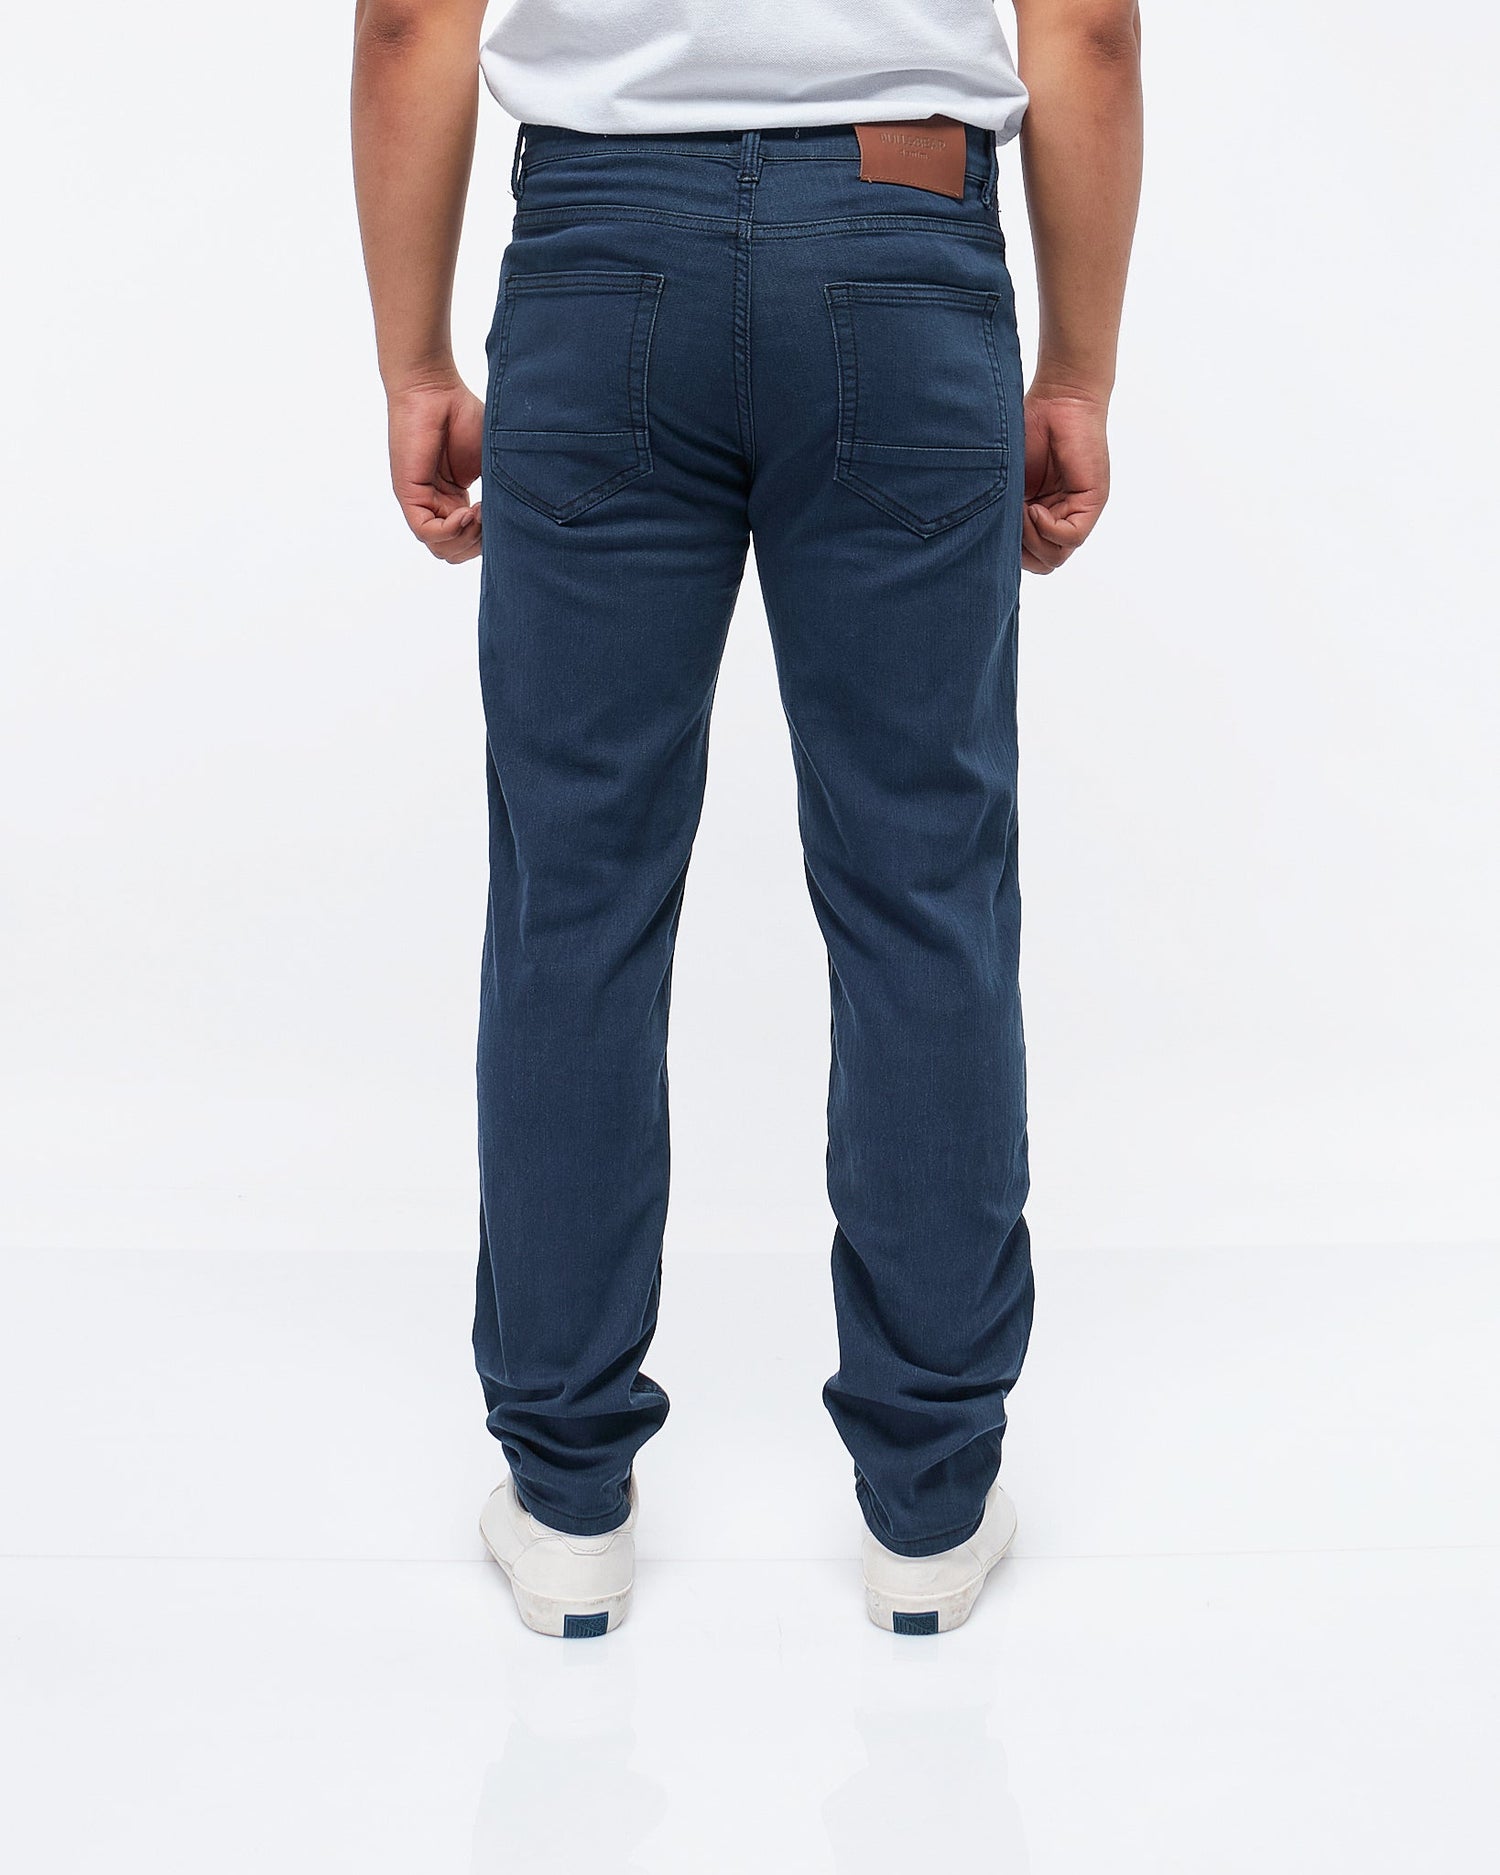 MOI OUTFIT-Soft Stretchy Men Slim Fit Jeans 24.90